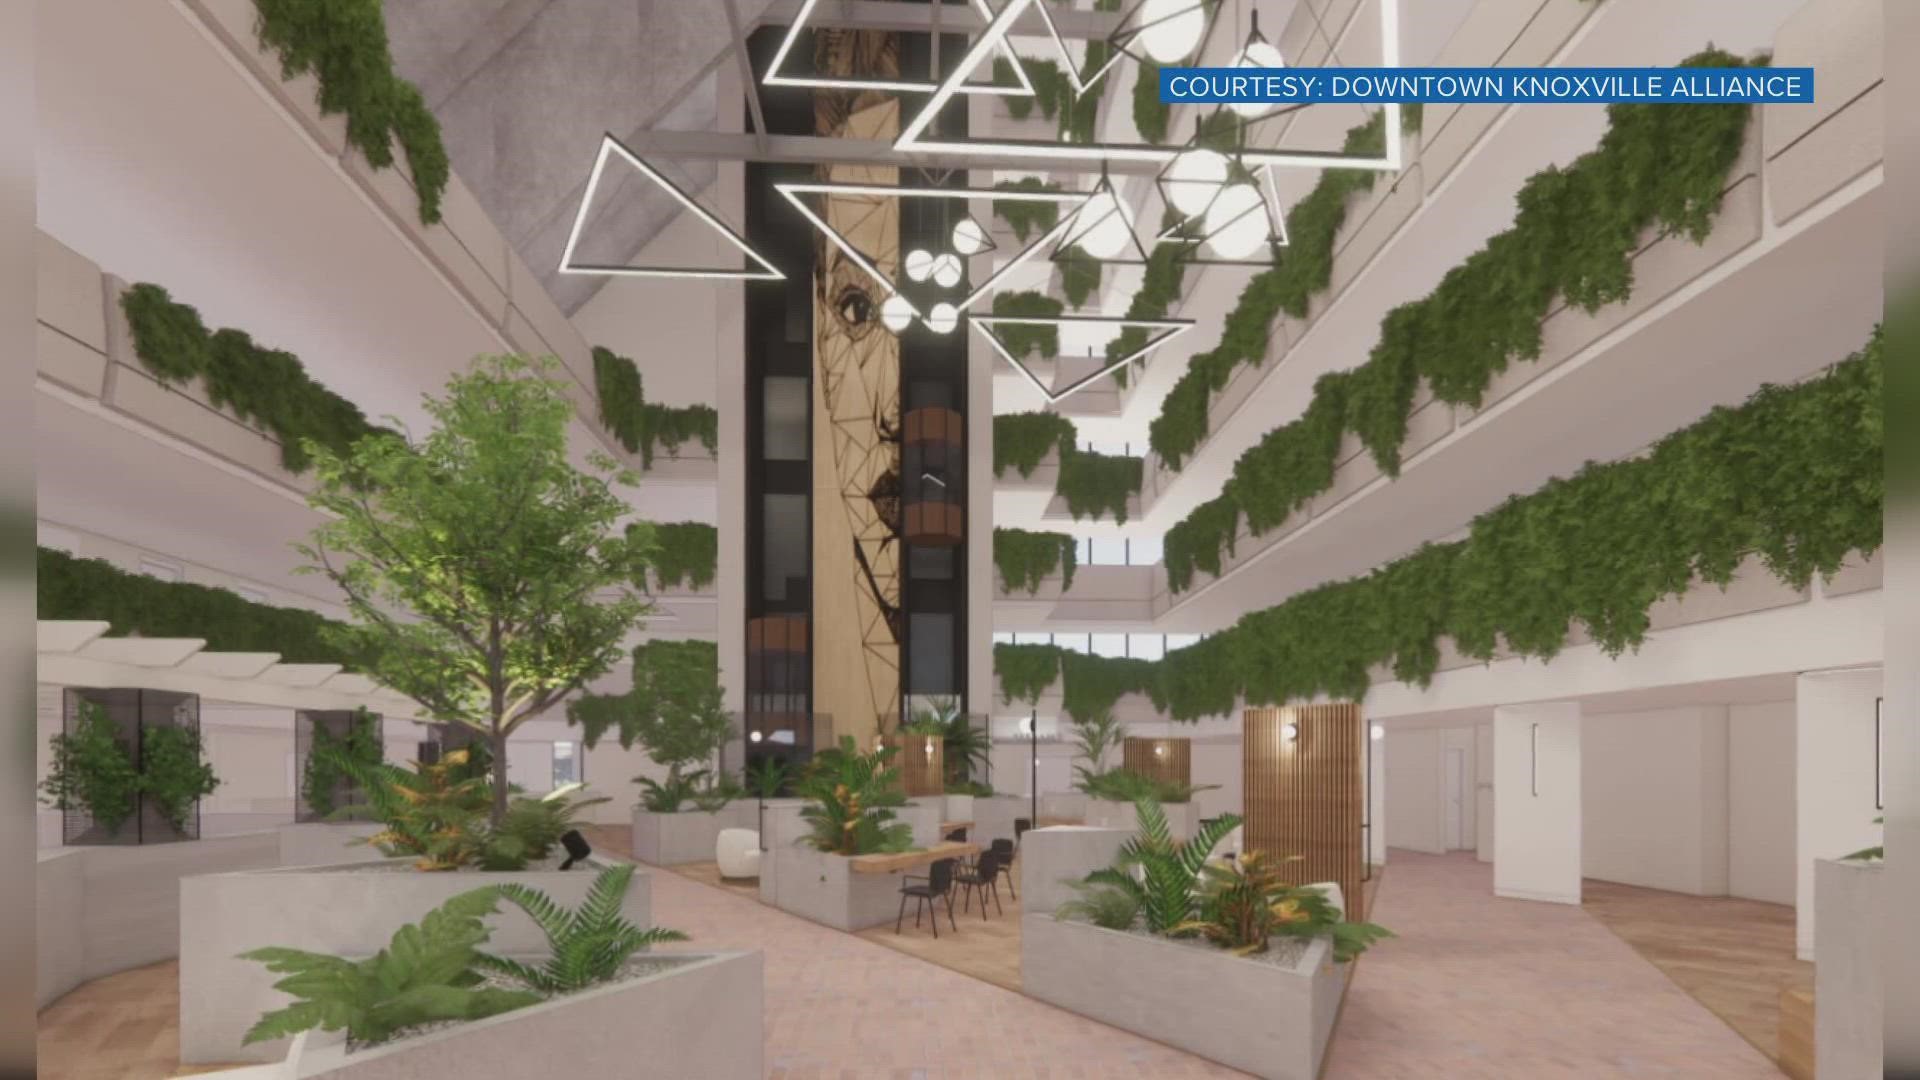 The project is described as an "adaptive reuse project," changing the building from a former Marriot hotel to a 375-unit apartment building with retail space.